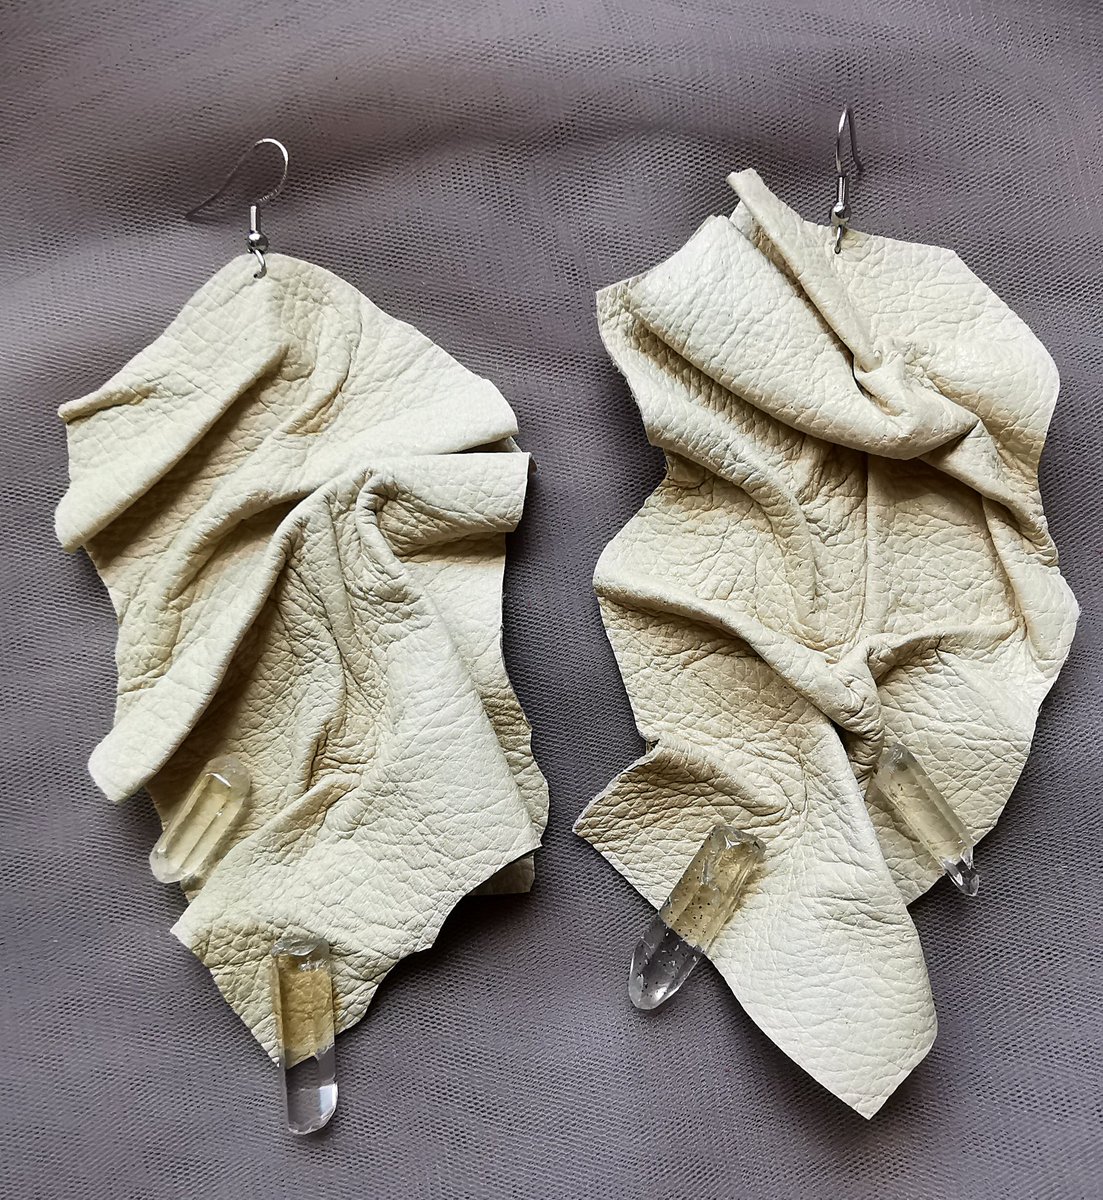 Oversized Hand Mold Sculpted leather earrings with raw quartz crystals
🌟Folded Leather Huge Earrings
etsy.com/listing/172457…

#foldedearrings #StatementEarrings #moldearrings #leatherearrings #leathercraft #quartzcrystals #elyseeart #contemporaryearrings